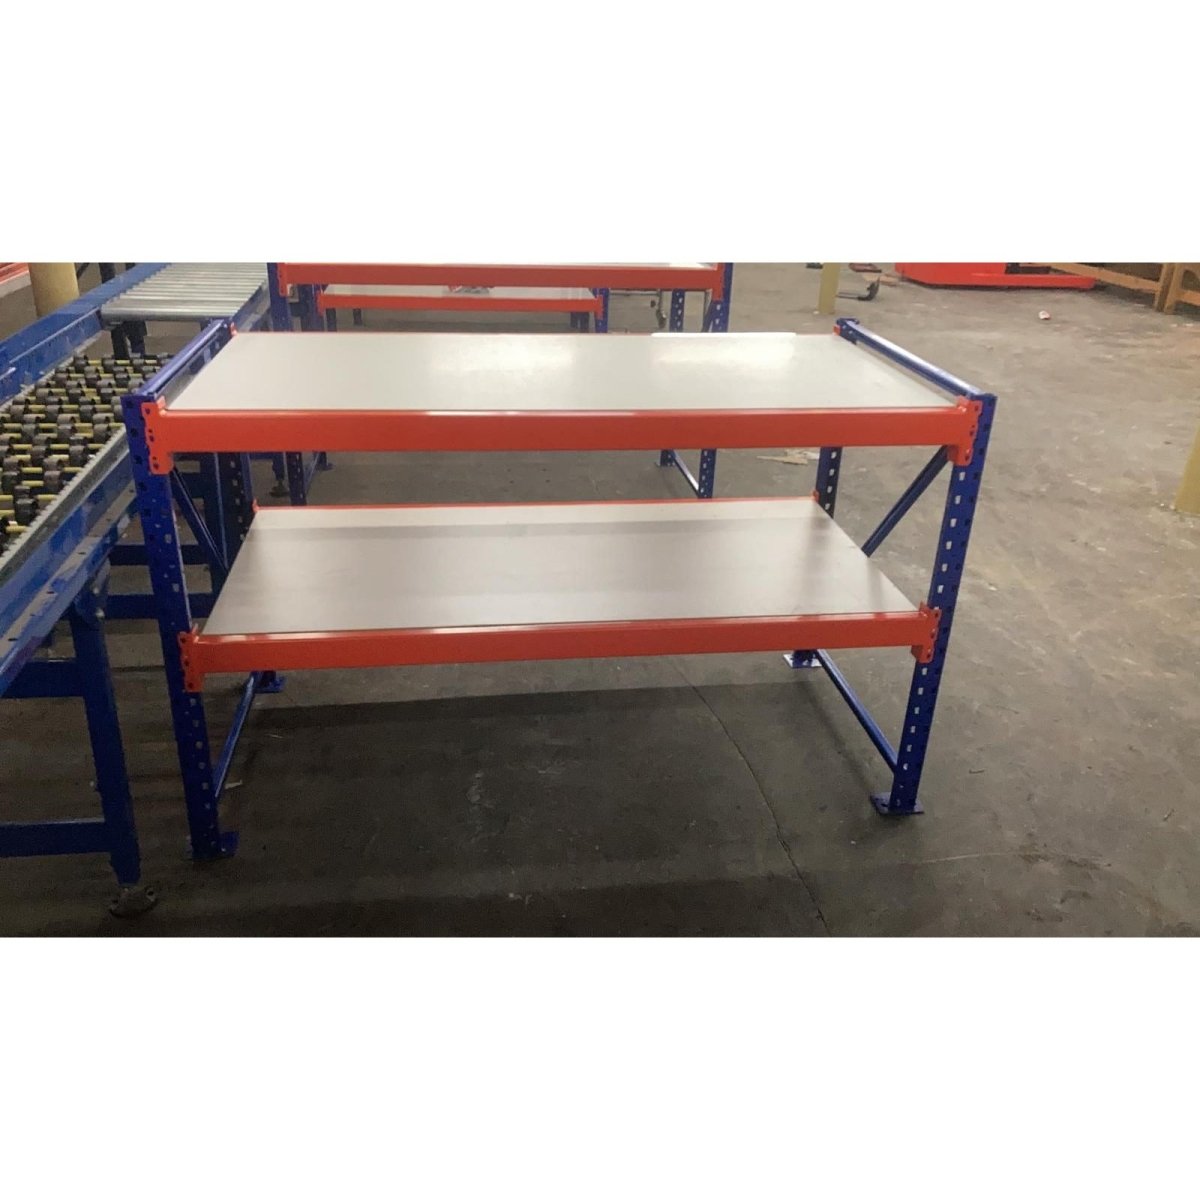 WSP's Heavy Duty Workstation With 2 Tier Chipboard Shelves - Warehouse Storage Products